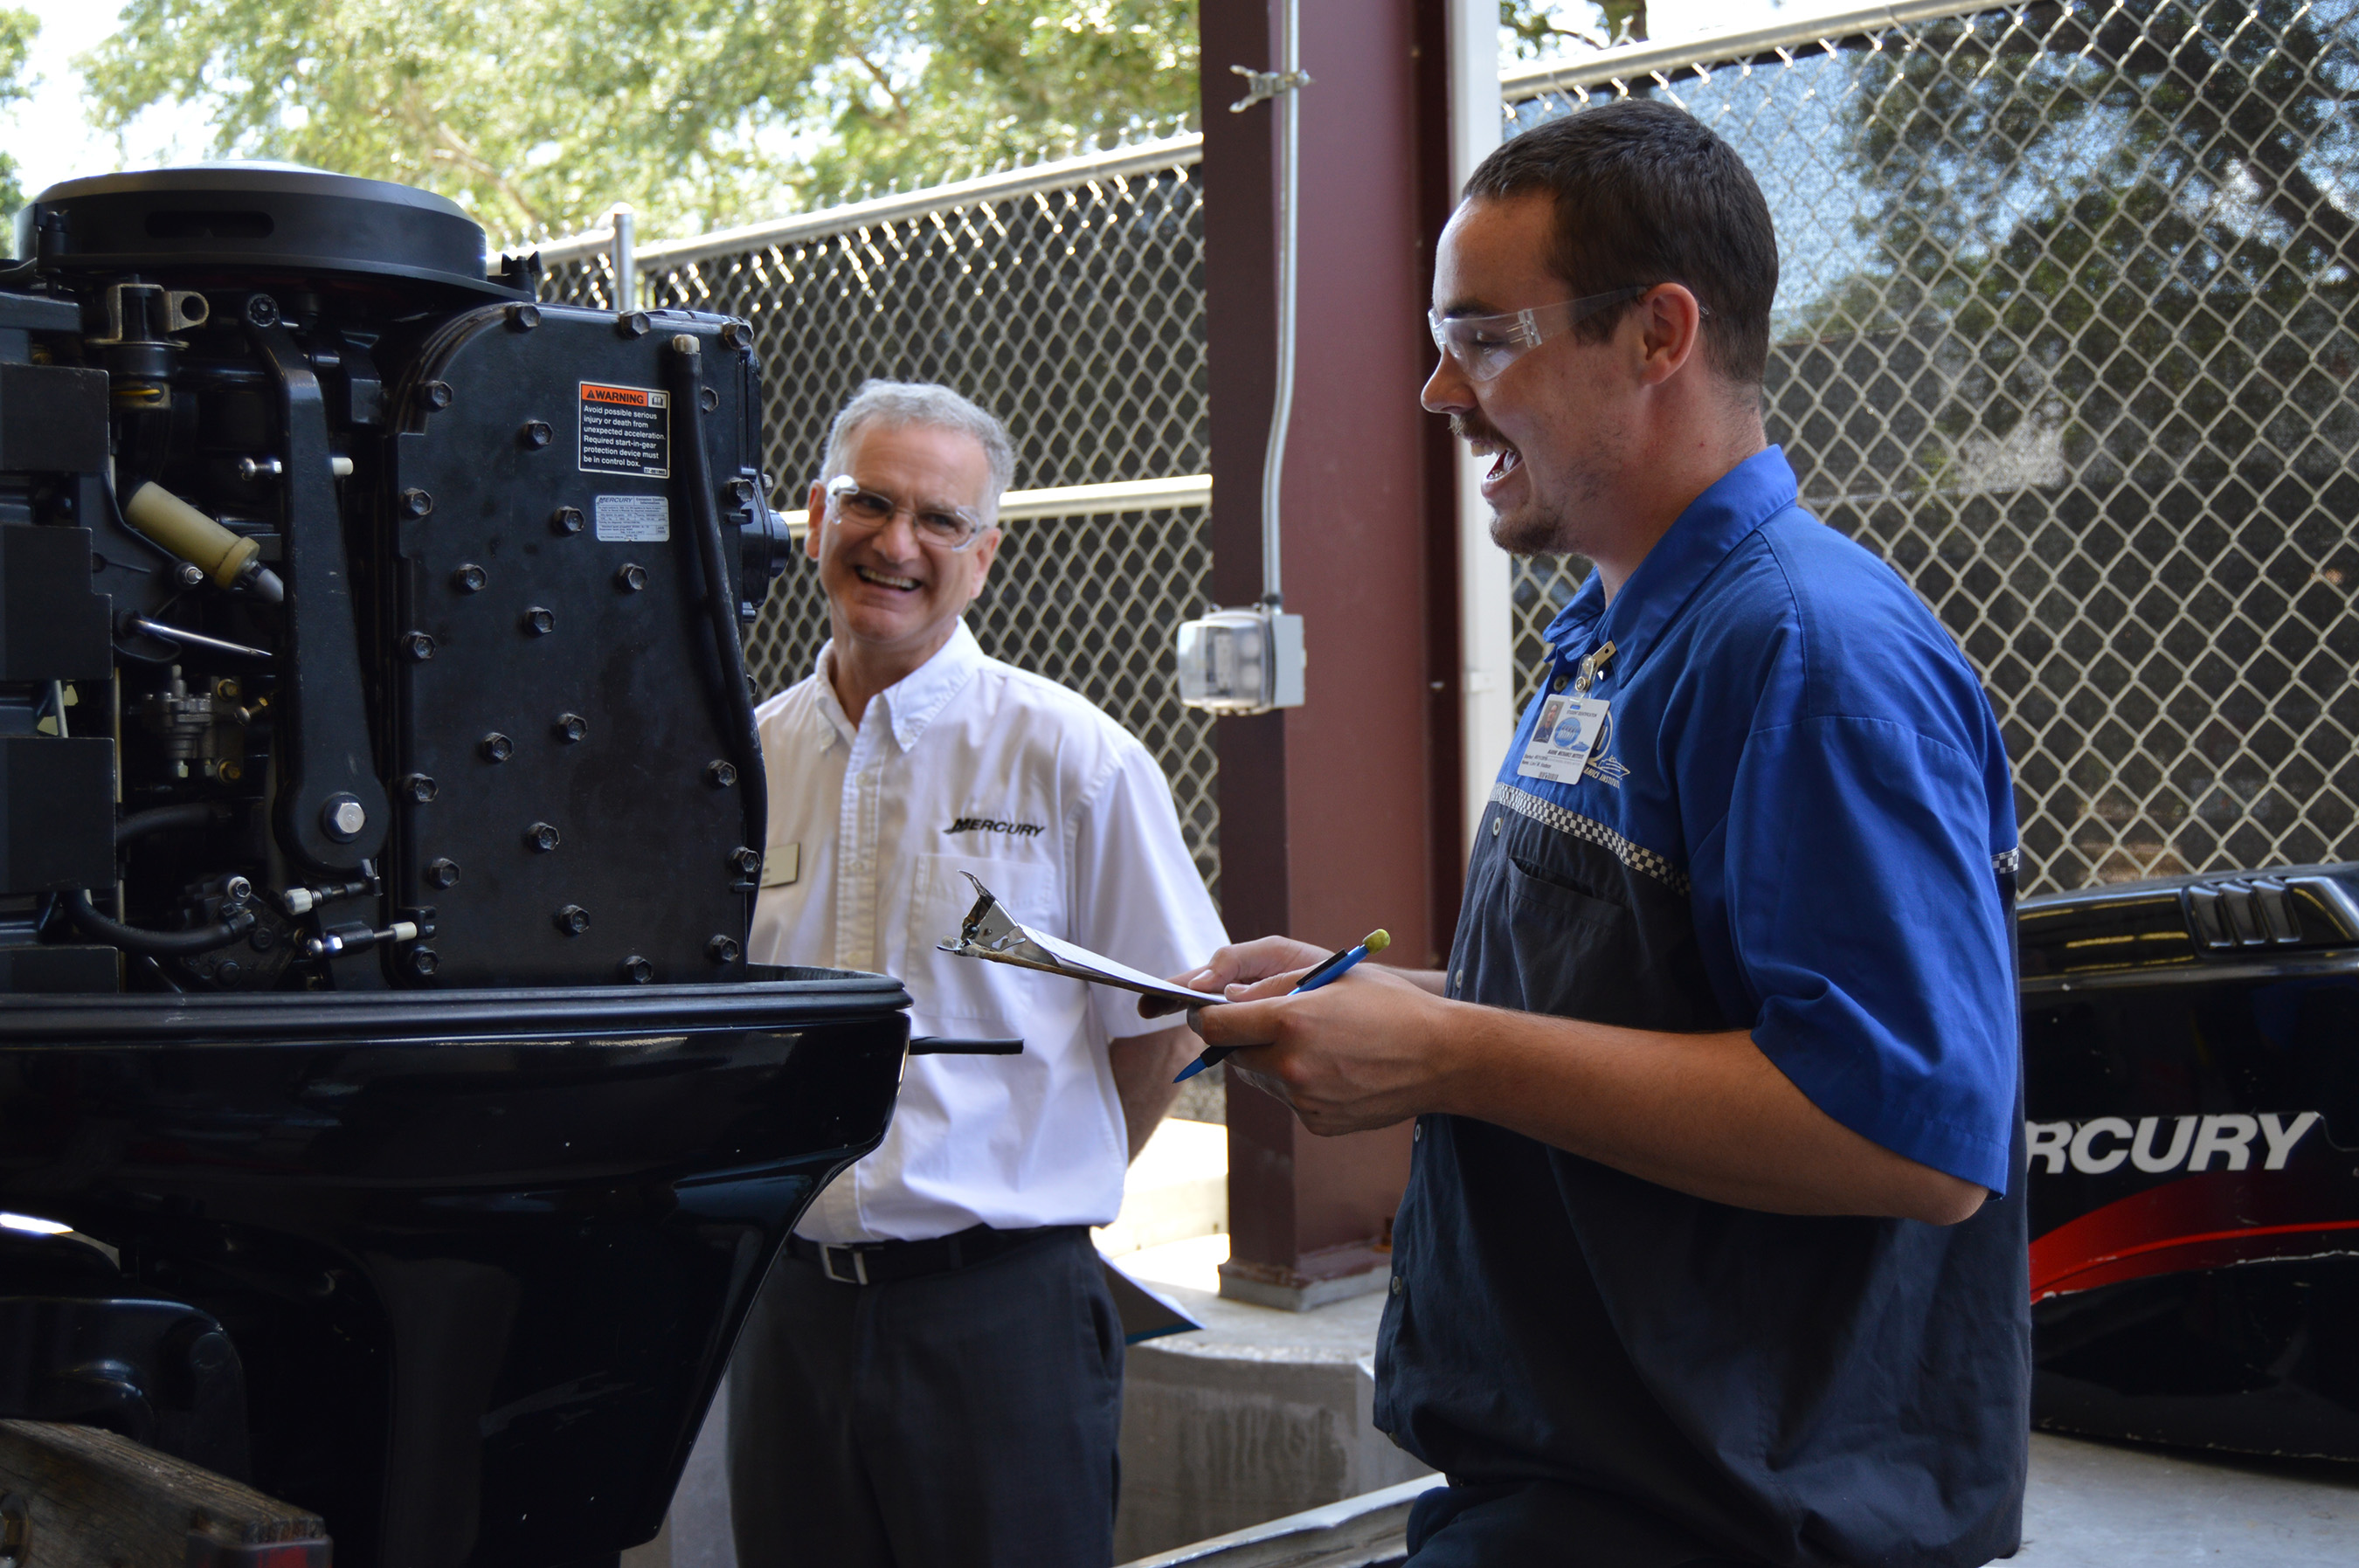 (L to R)  Tom Miller, Director of Service Training, Mercury Marine Corporation, discusses the new provisional certification program for Mercury outboard motors with Marine Mechanics Institute (MMI) student Levi Hodson.  MMI is the only career technical education school in the country with which Mercury Marine is offering this certification program.